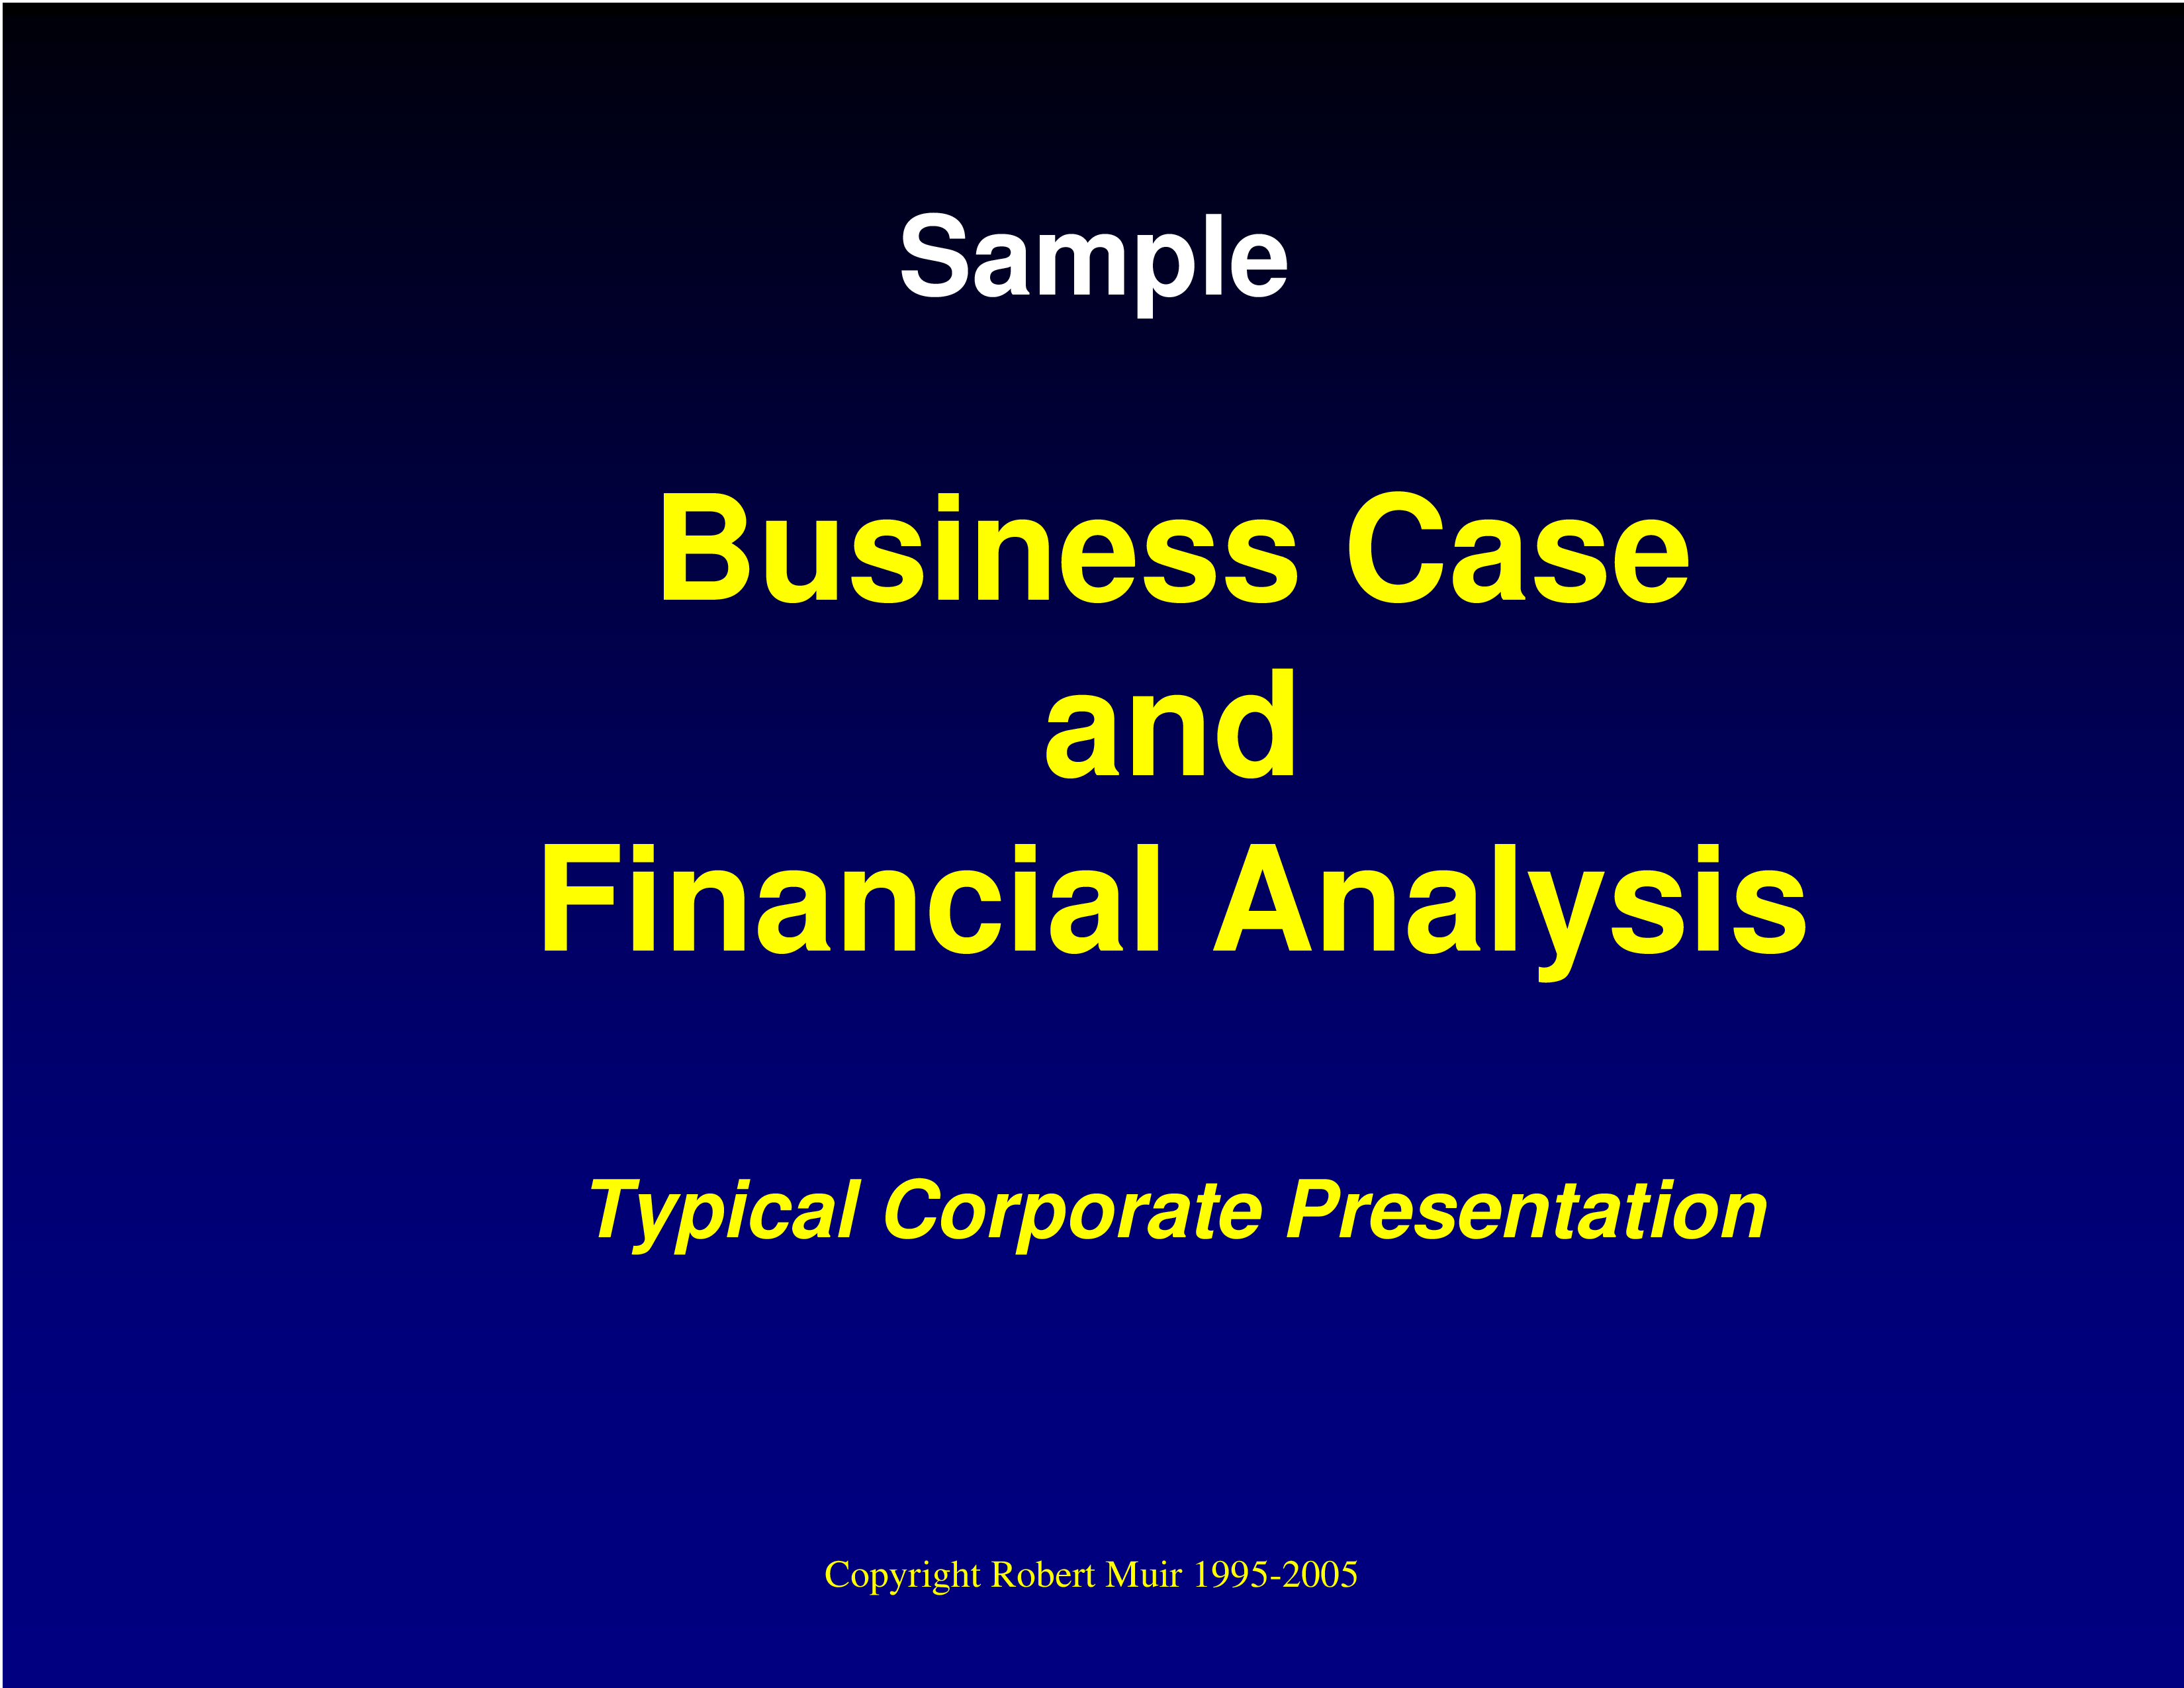 financial-business-case-analysis-templates-at-allbusinesstemplates